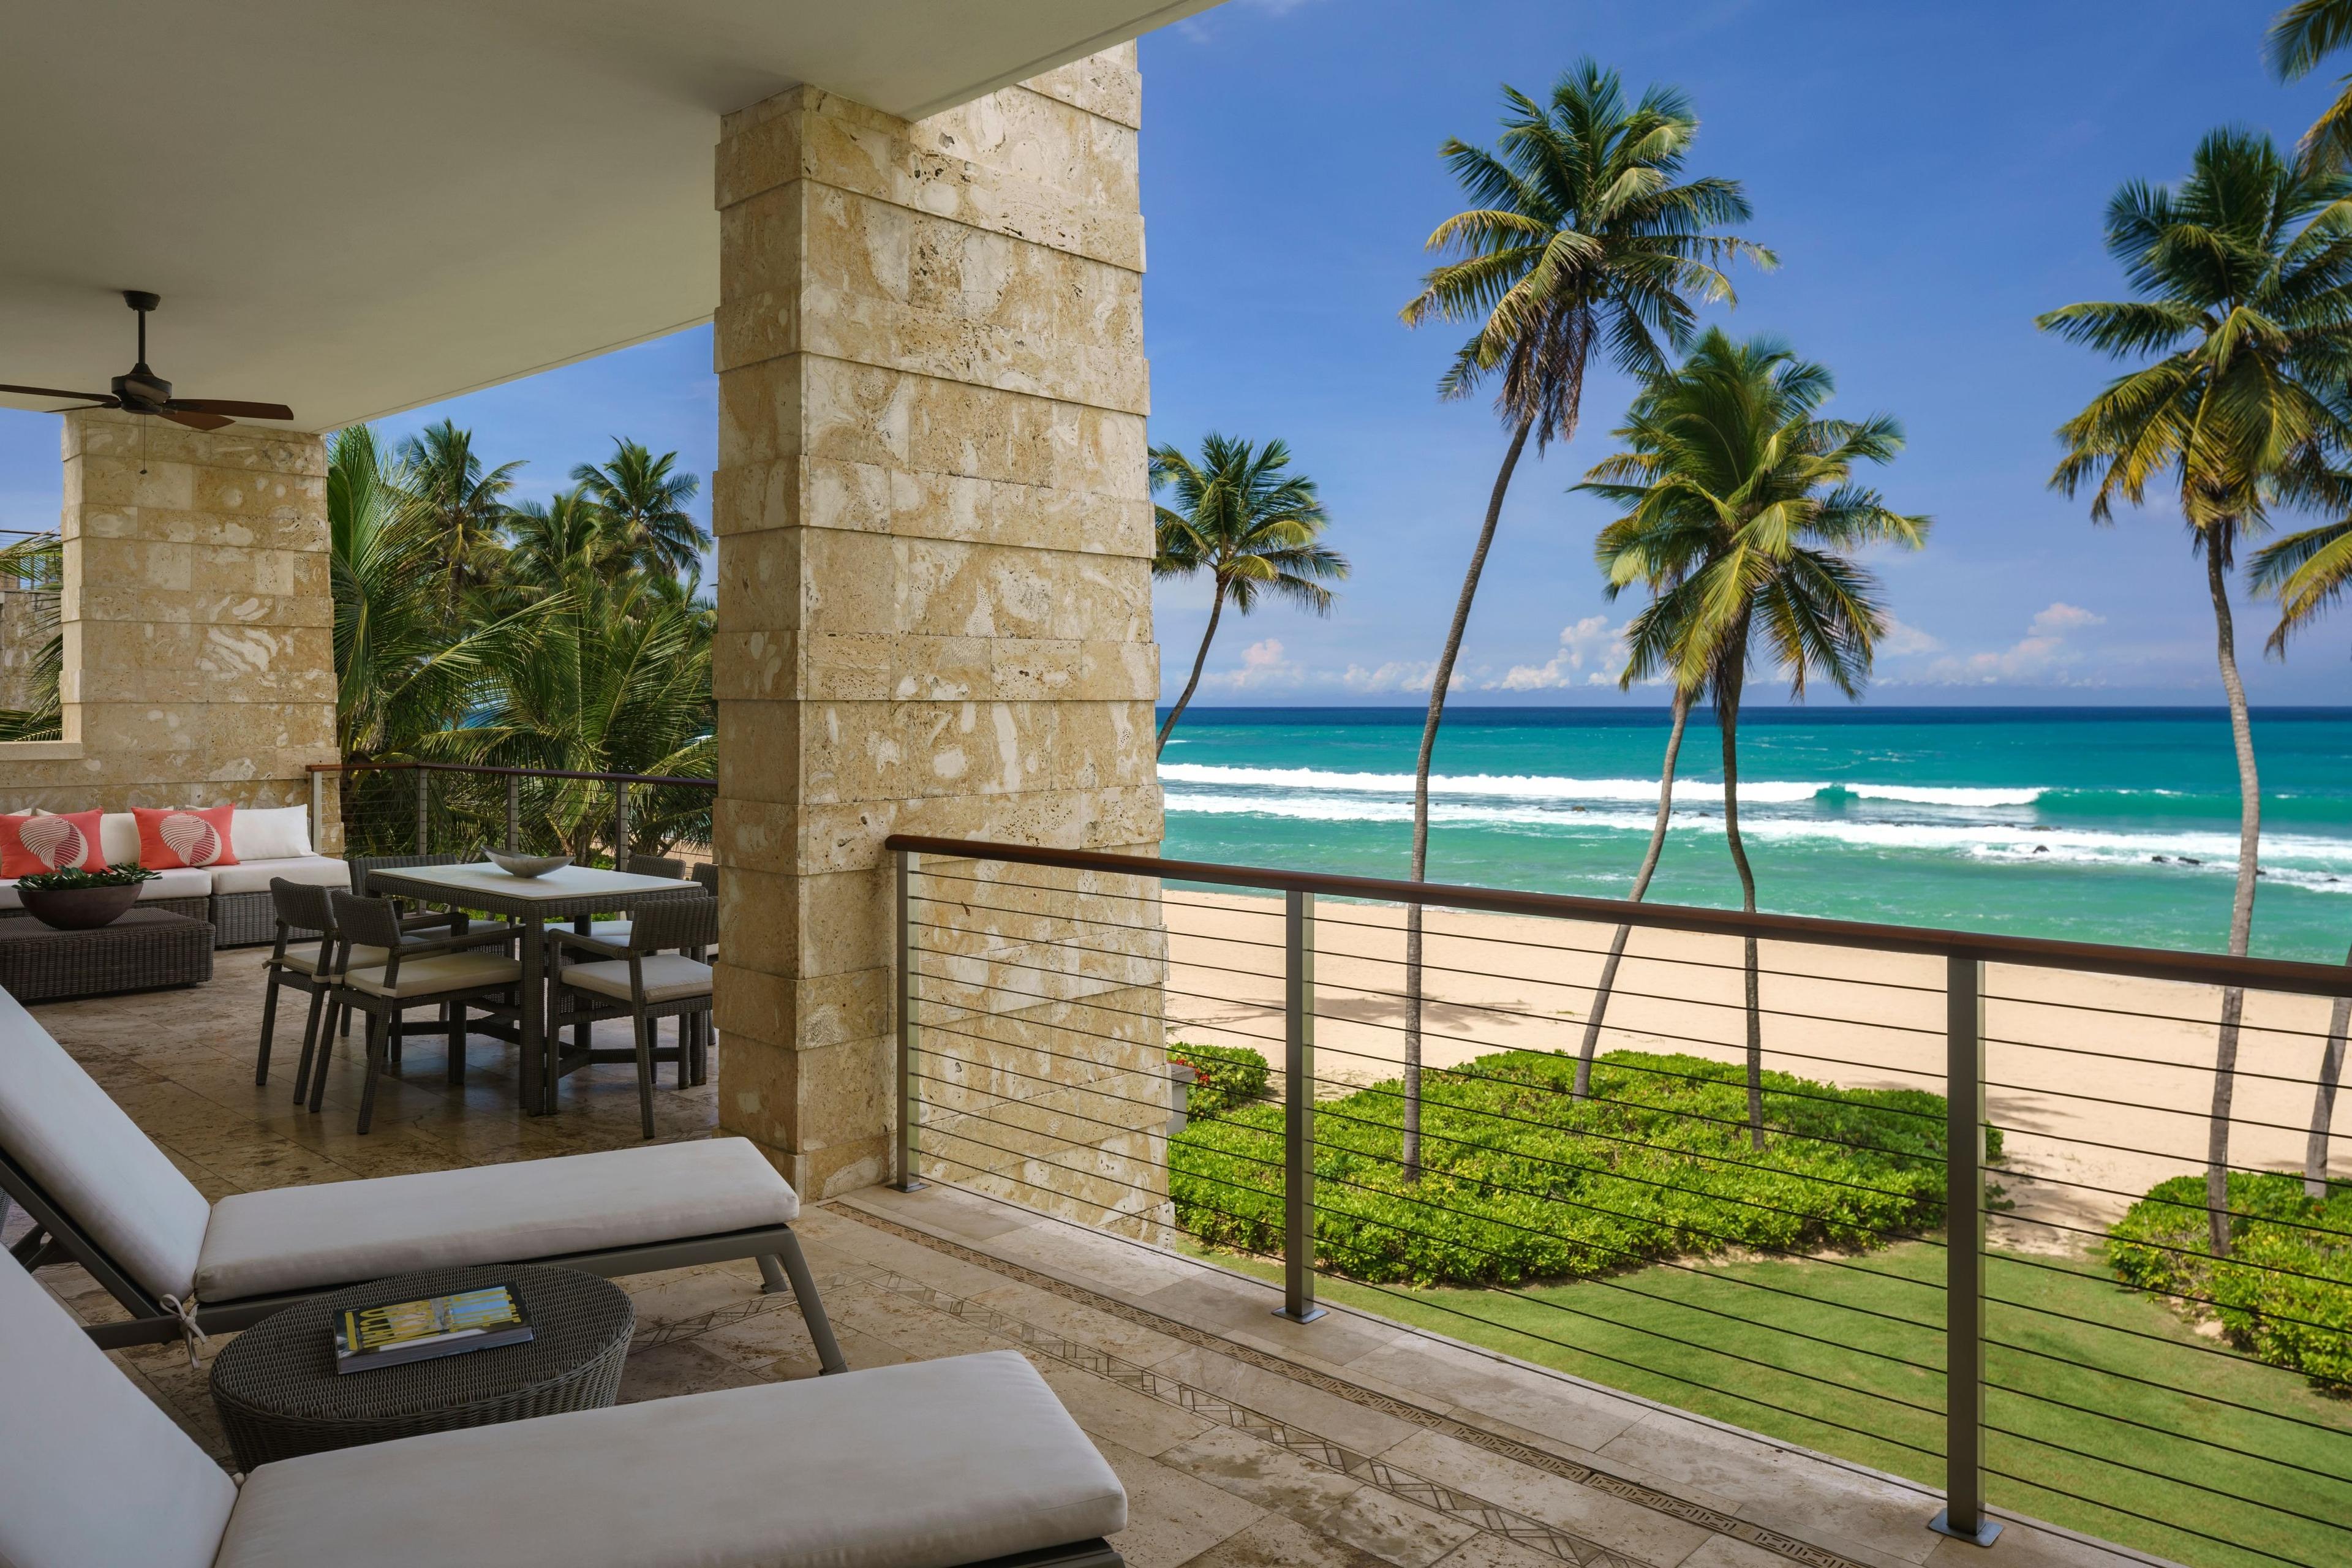 All of our Ritz-Carlton Residences provide the best luxury experience and ocean views to enjoy Dorado Beach at its best